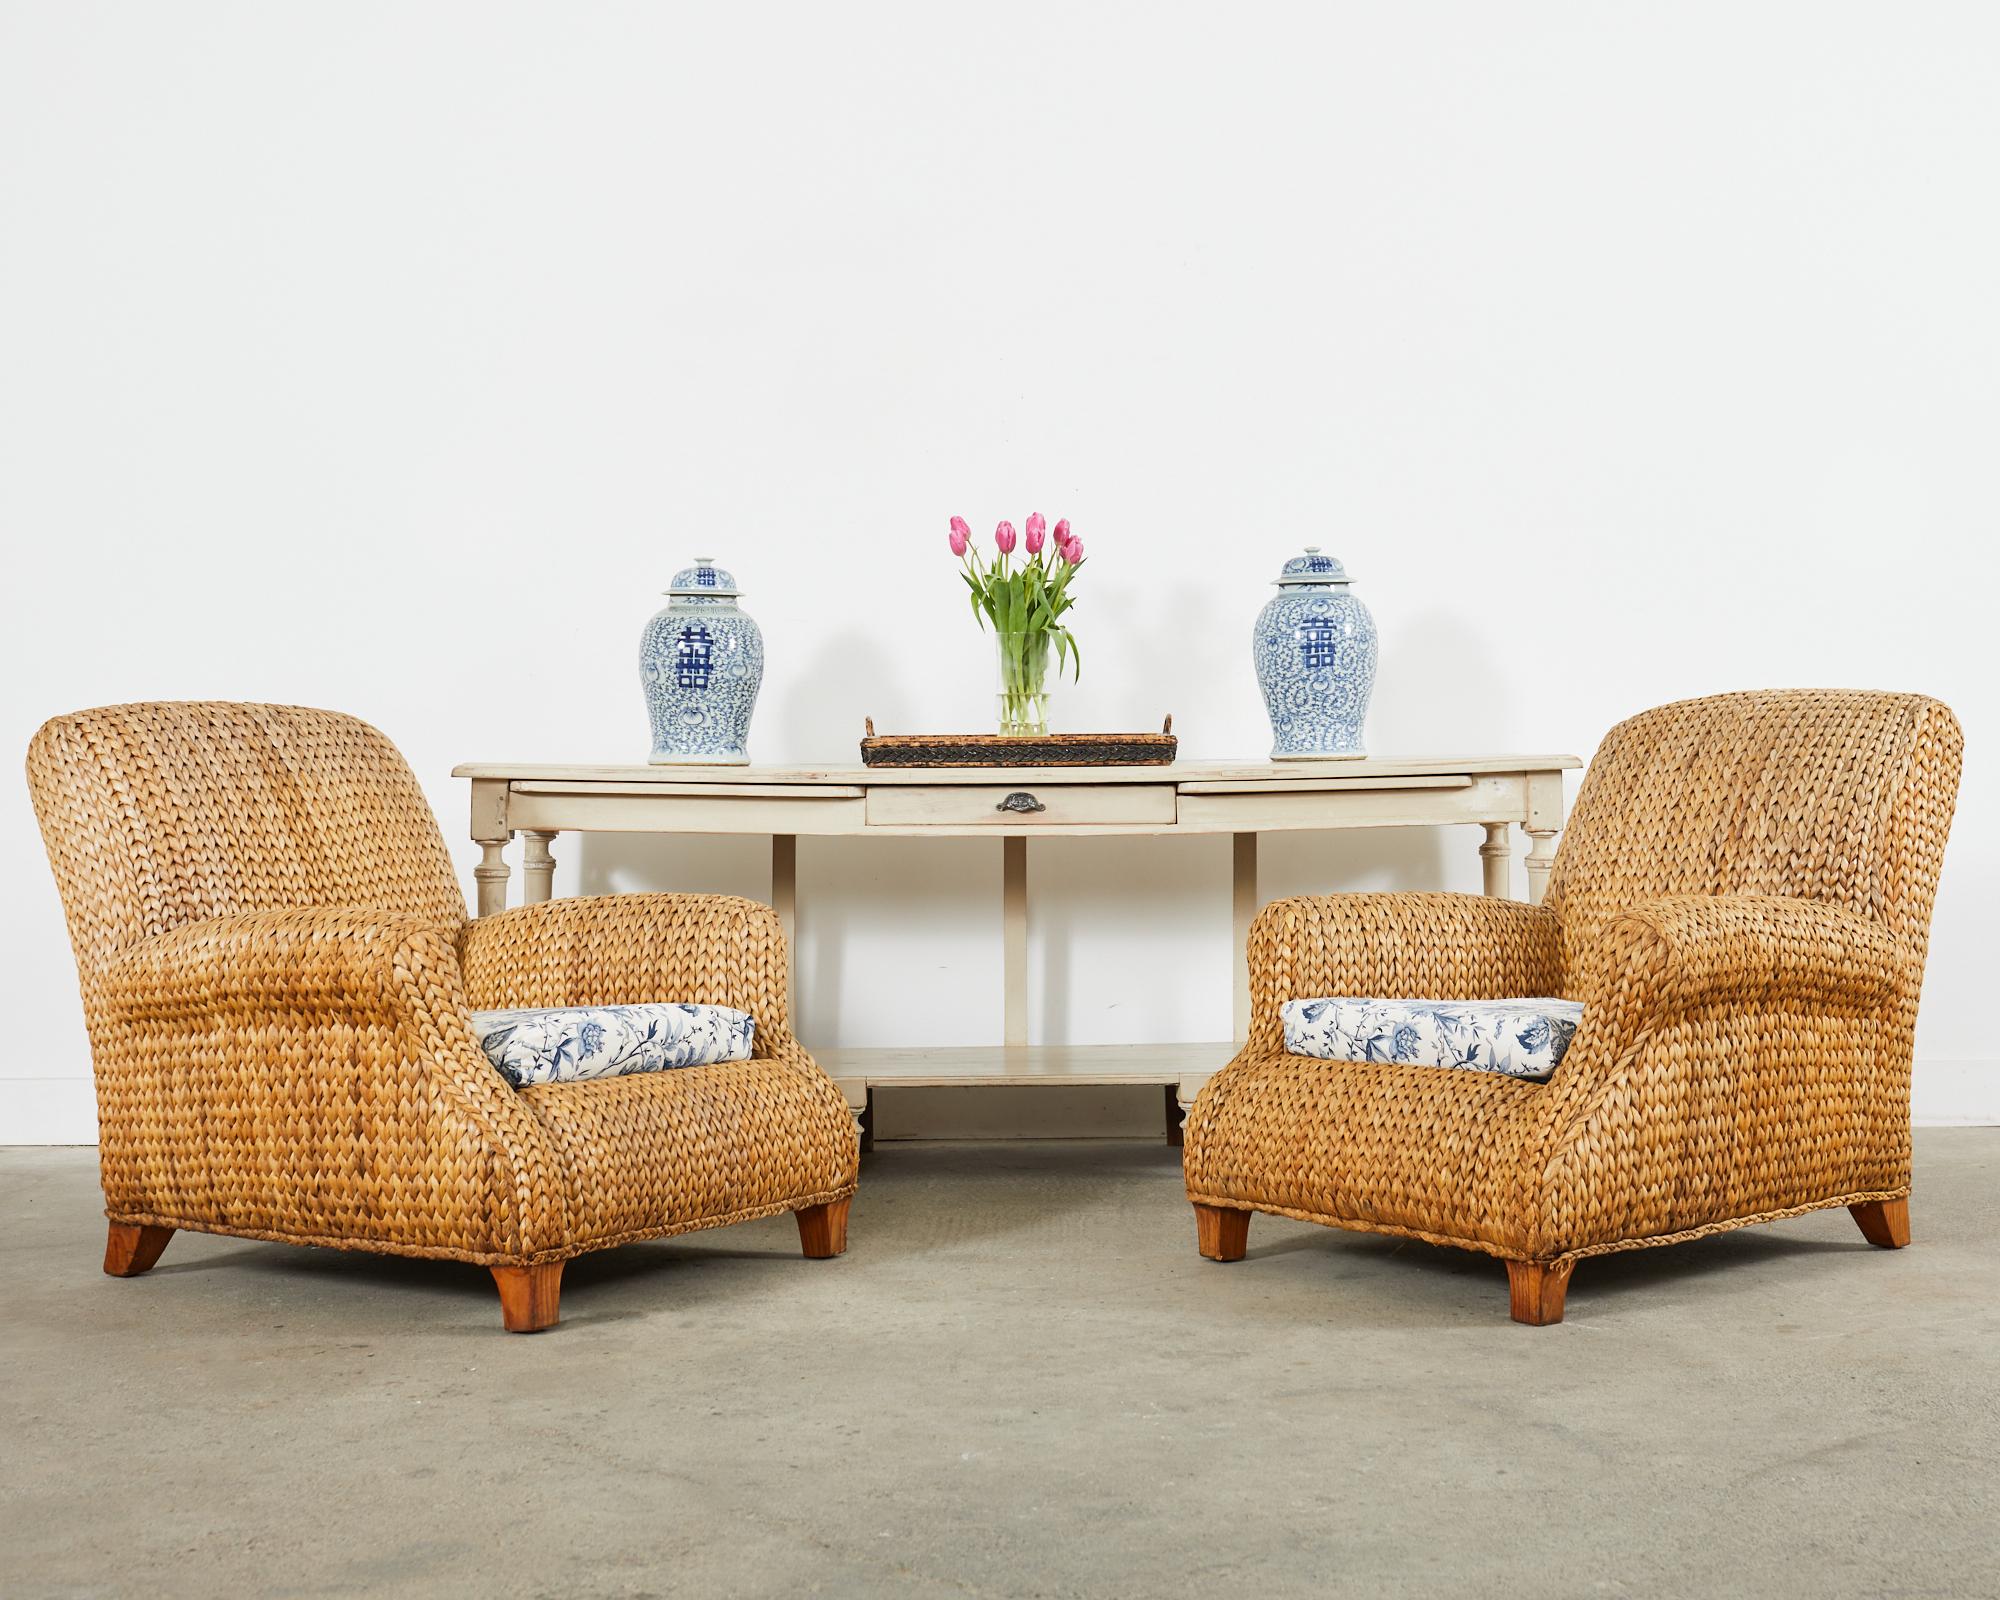 Rare pair of large woven seagrass and rattan lounge chairs or armchairs designed by Ralph Lauren. The chairs feature oversized rattan frames embellished with natural woven seagrass in the coastal organic modern style. The chairs are very sturdy and